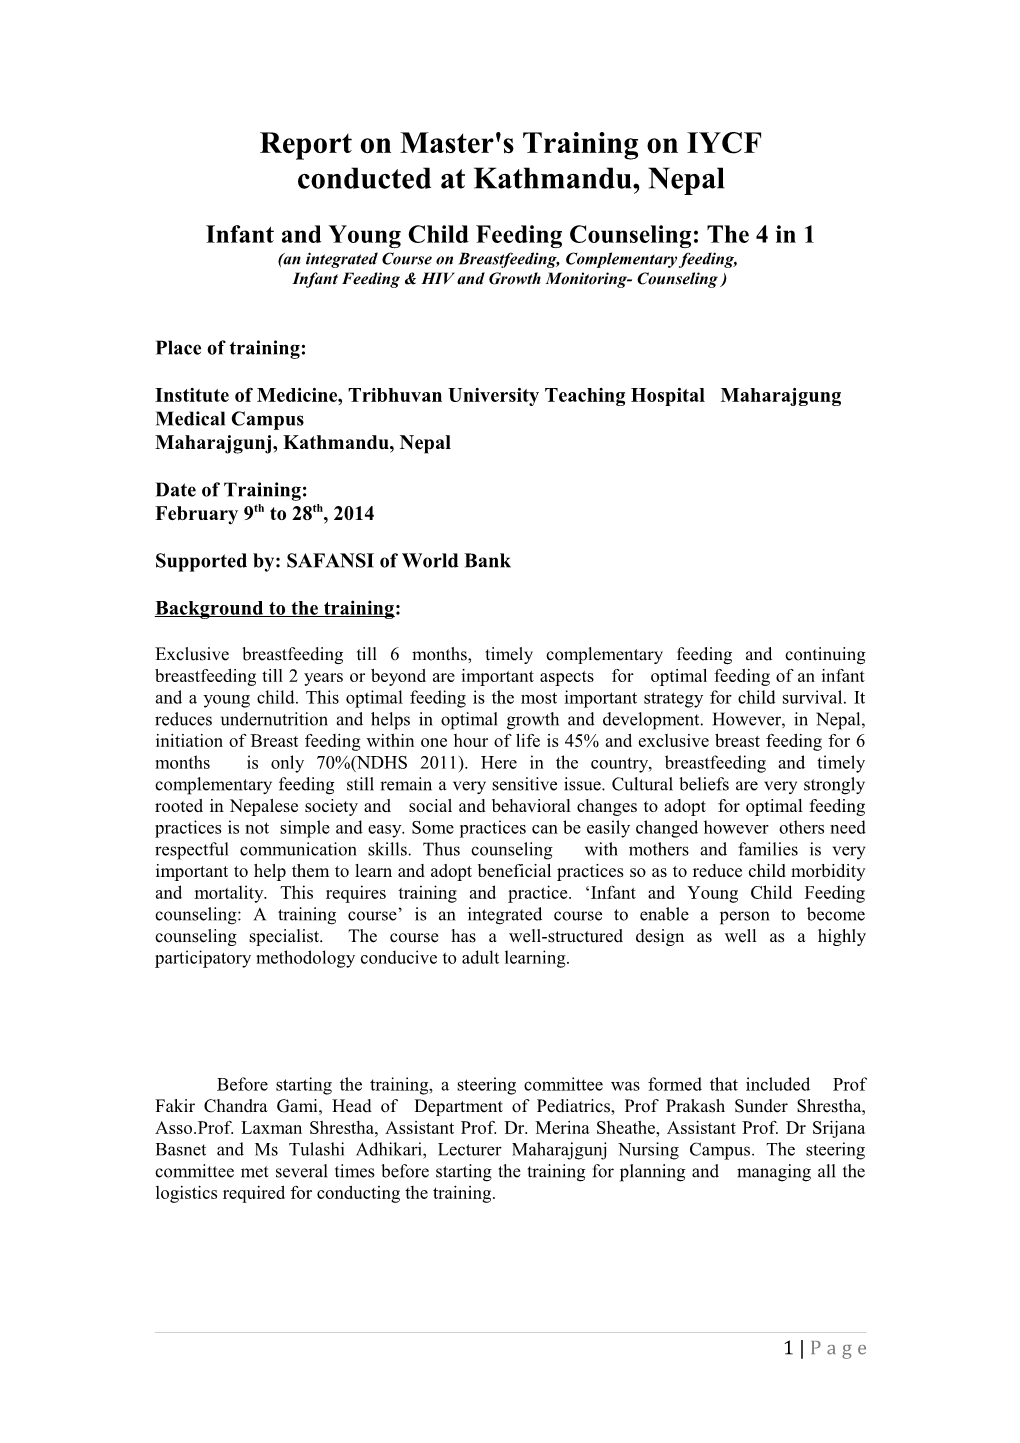 Report on Master's Training on IYCF